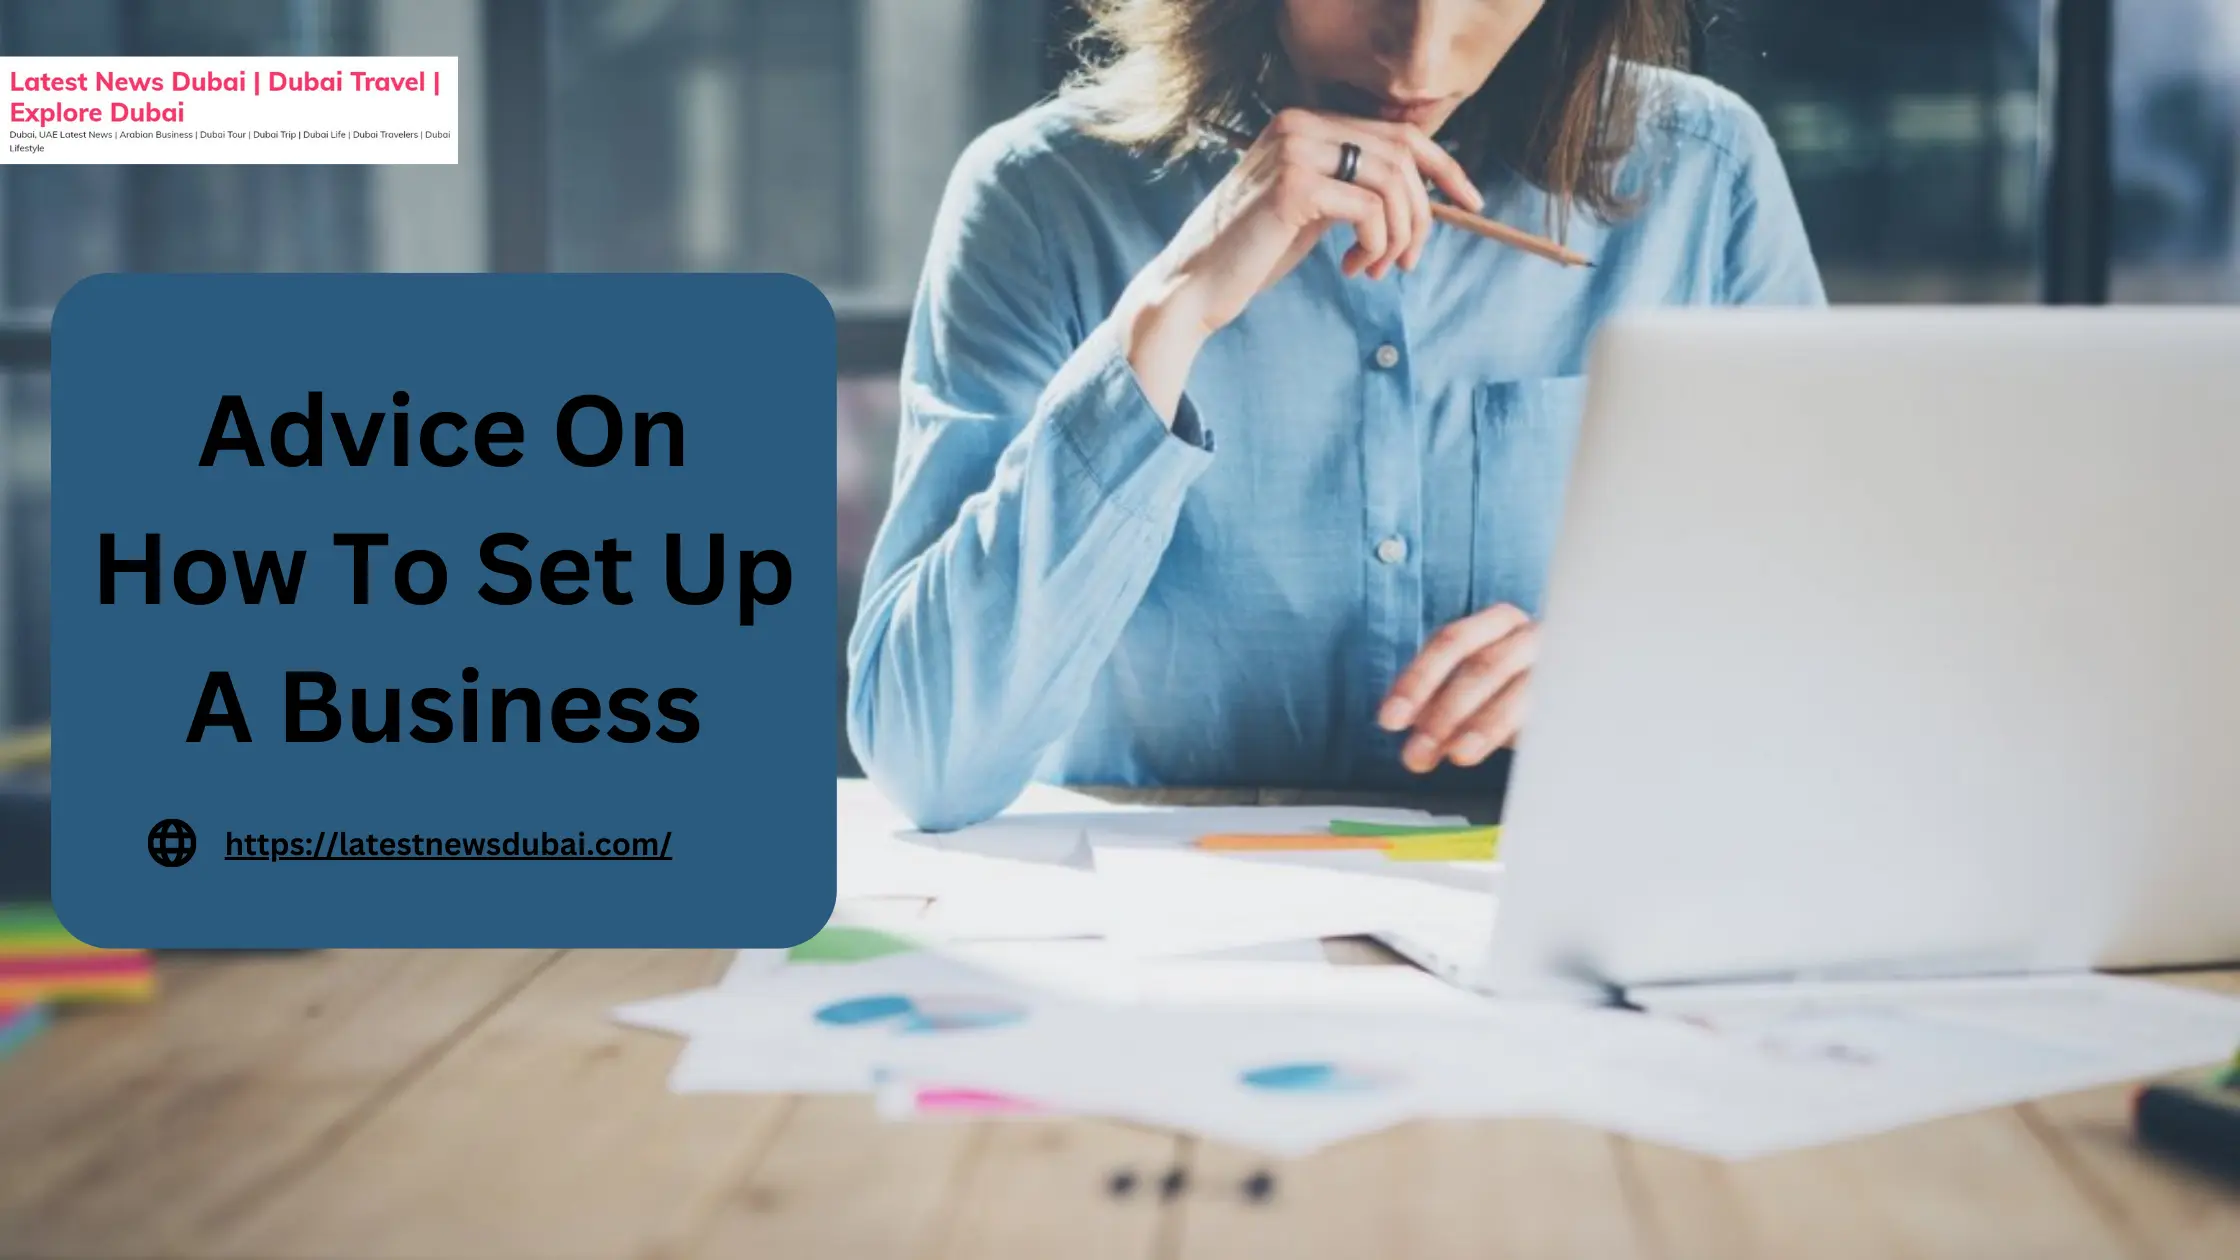 Advice On How To Set Up A Business